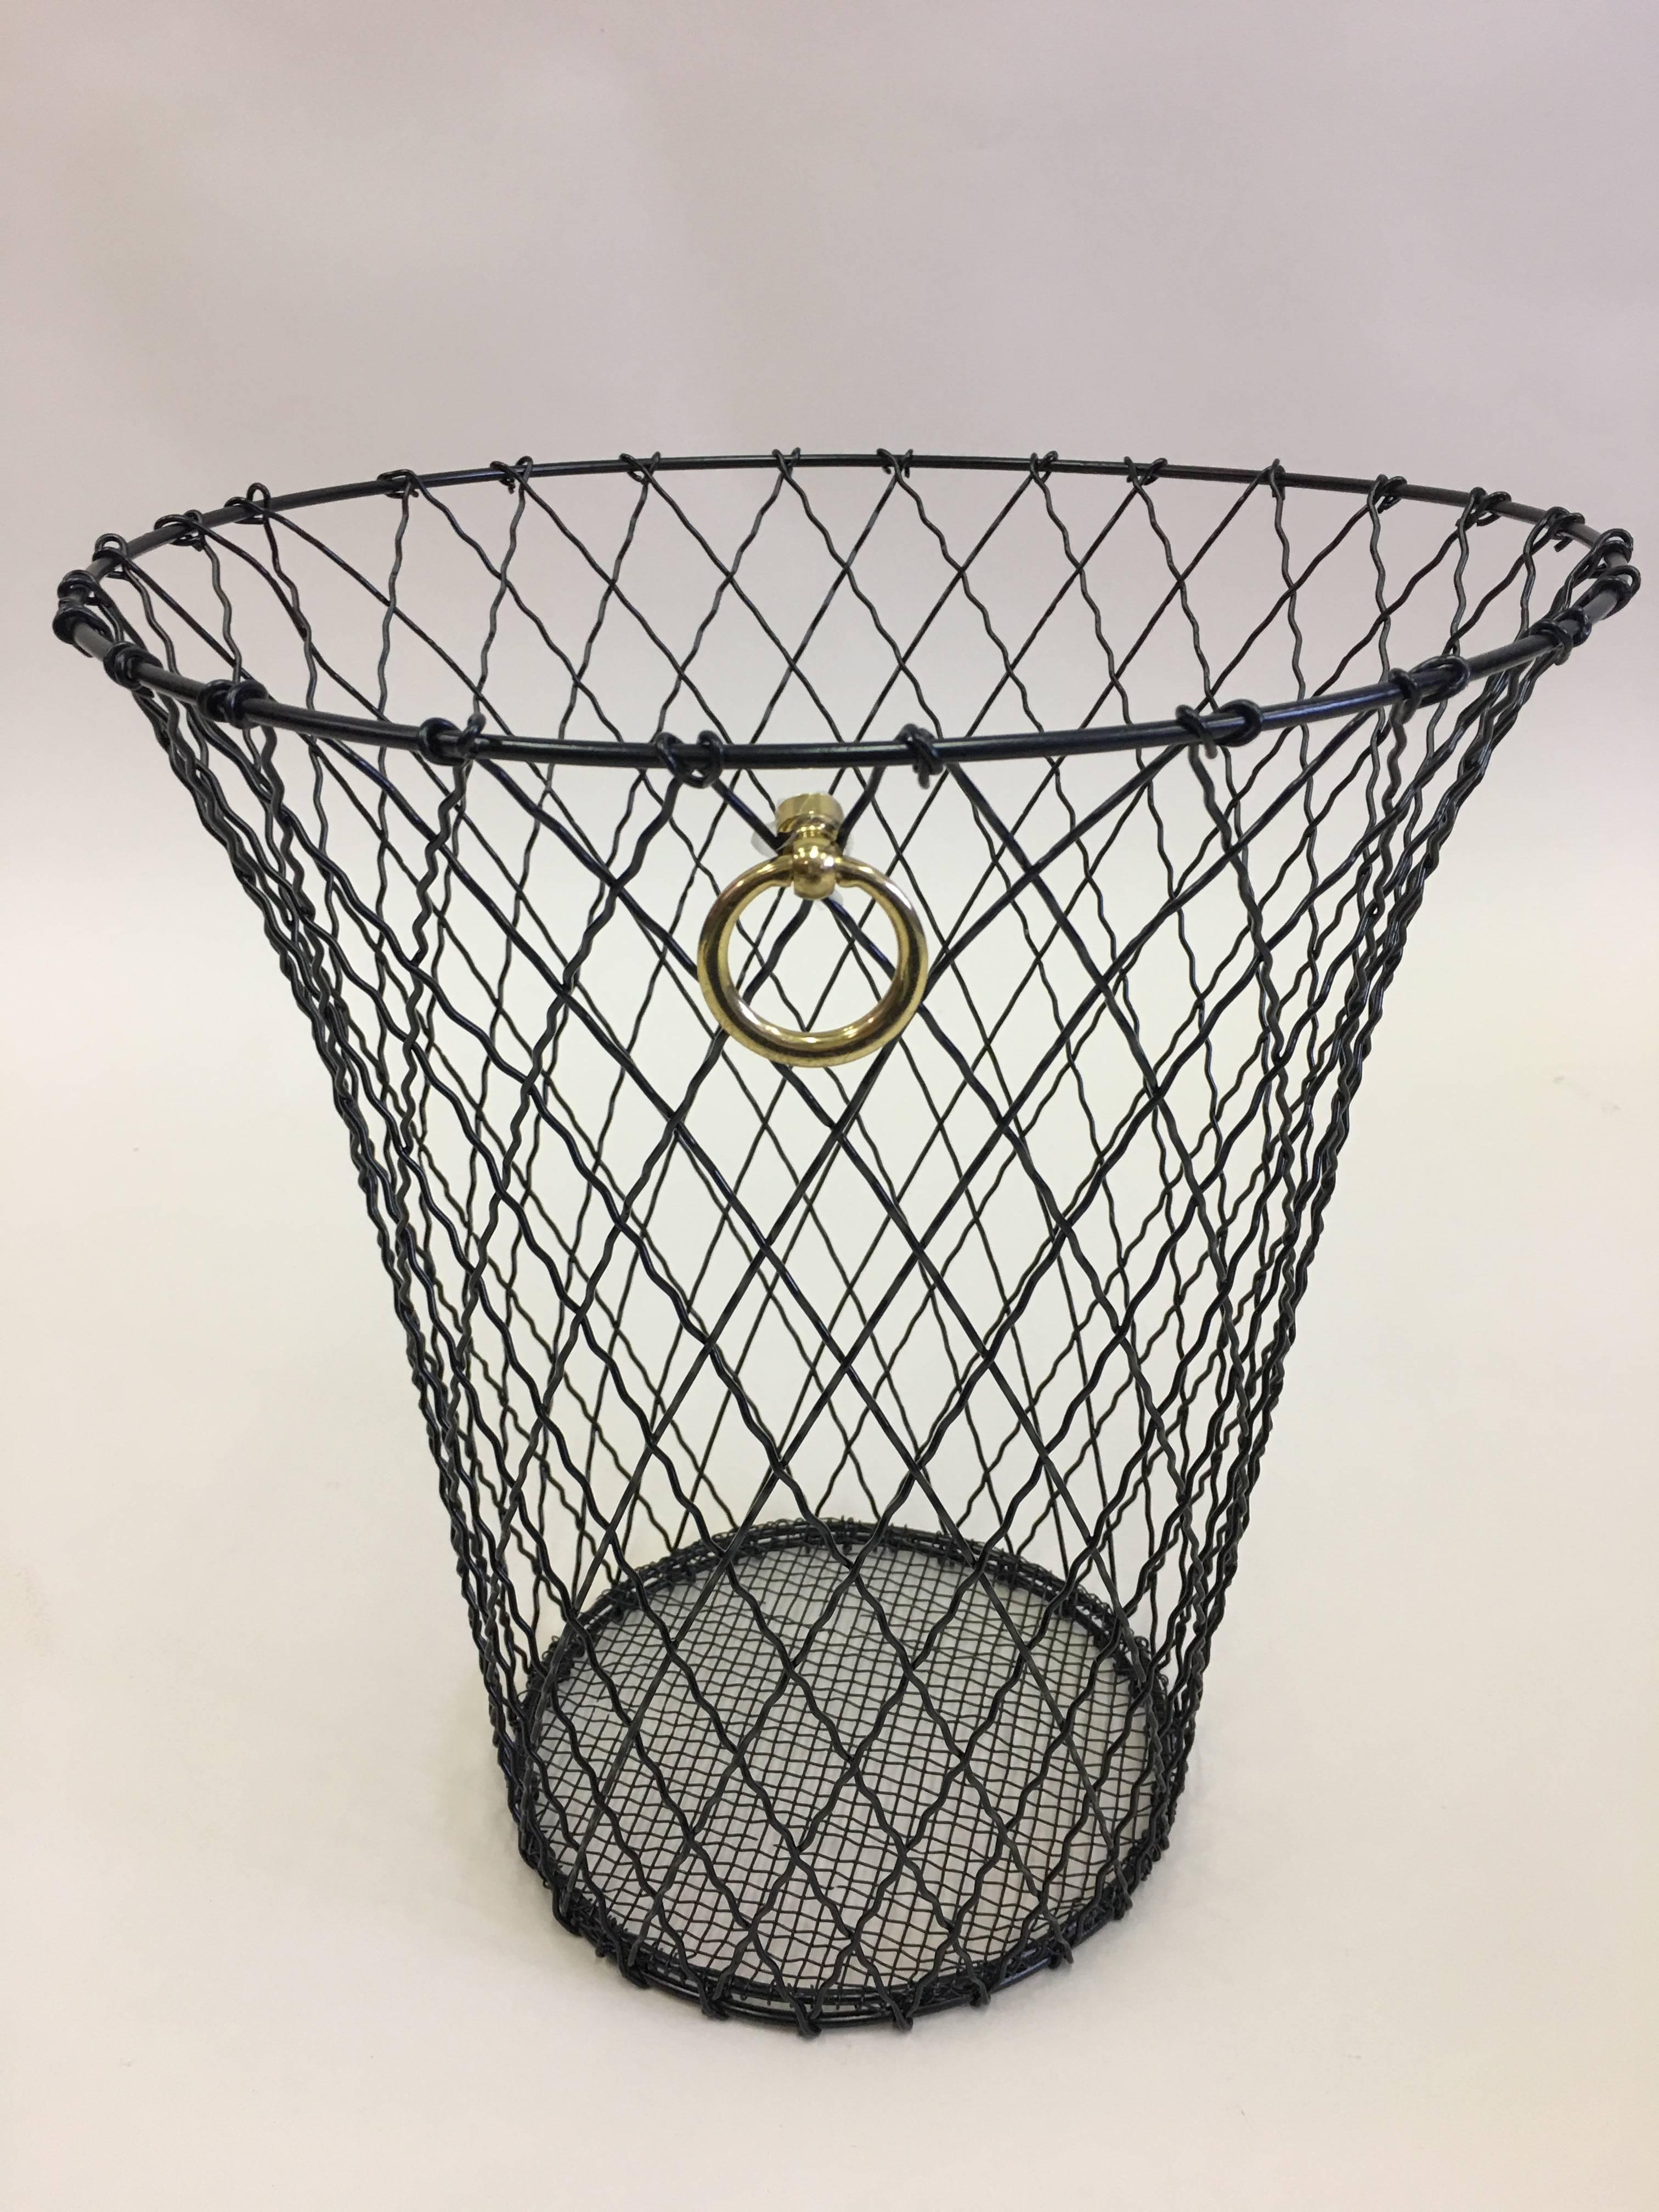 Two French trash baskets or wastebaskets that elegantly combine modern, neoclassical and industrial aesthetics. The pieces are composed of black enameled wire woven in a classic cross-hatched pattern completed by a solid brass ring pull.